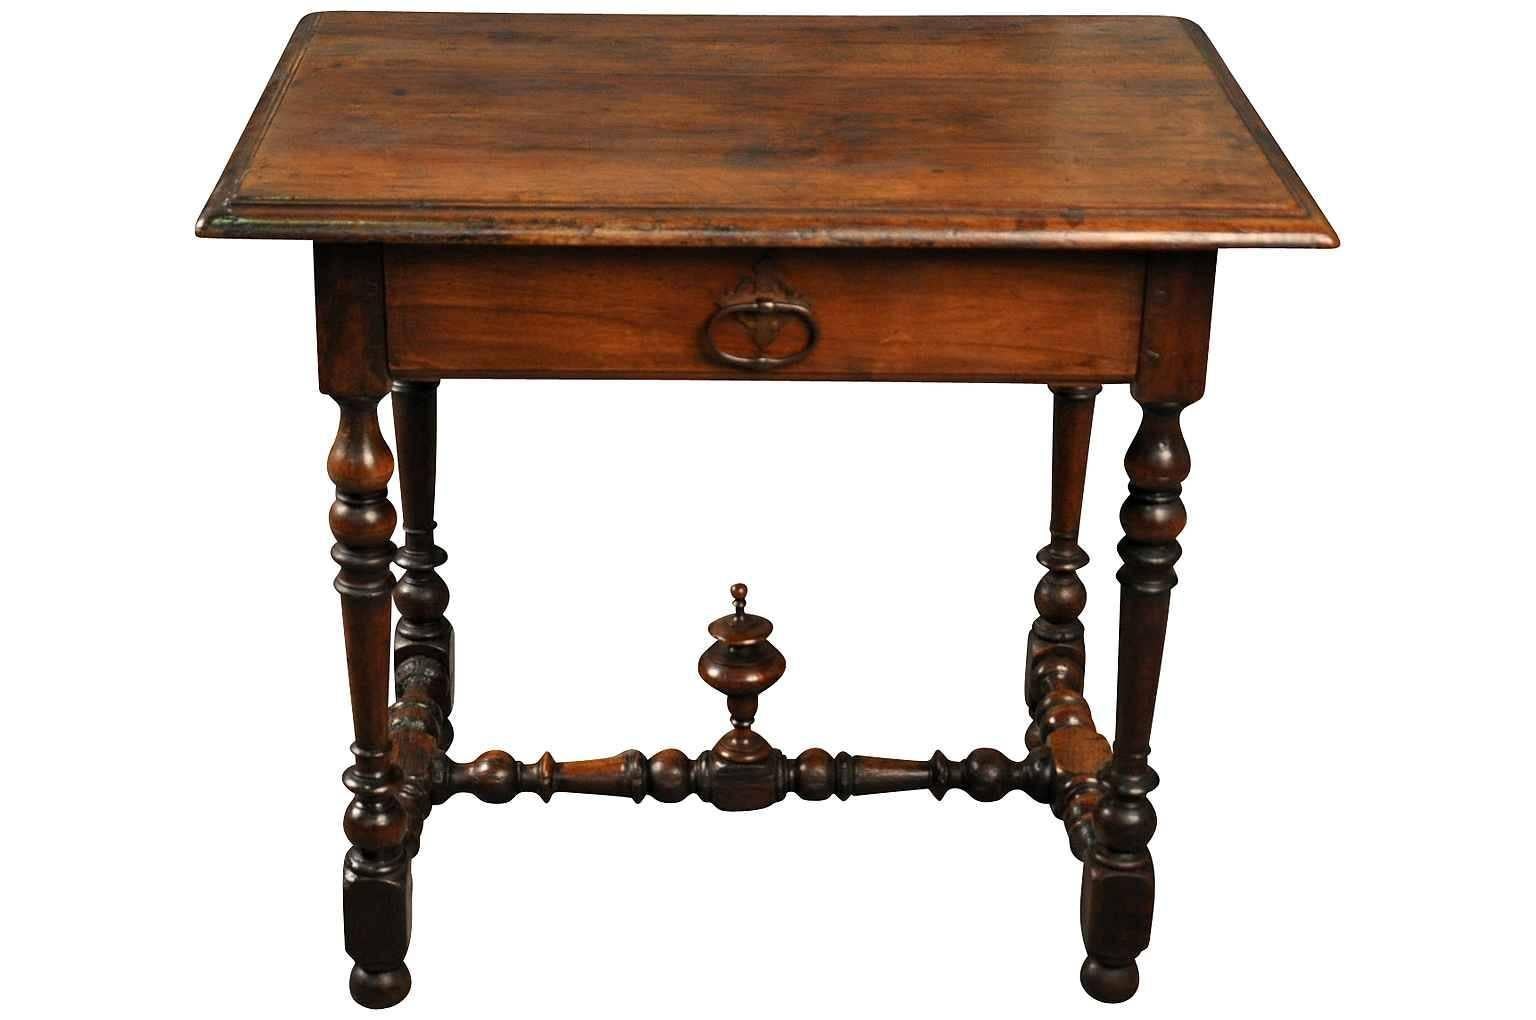 A very charming later 19th century French Louis XIII style side table. Beautifully constructed in walnut with one drawer and nicely turned legs. Perfect as a bedside table as well.